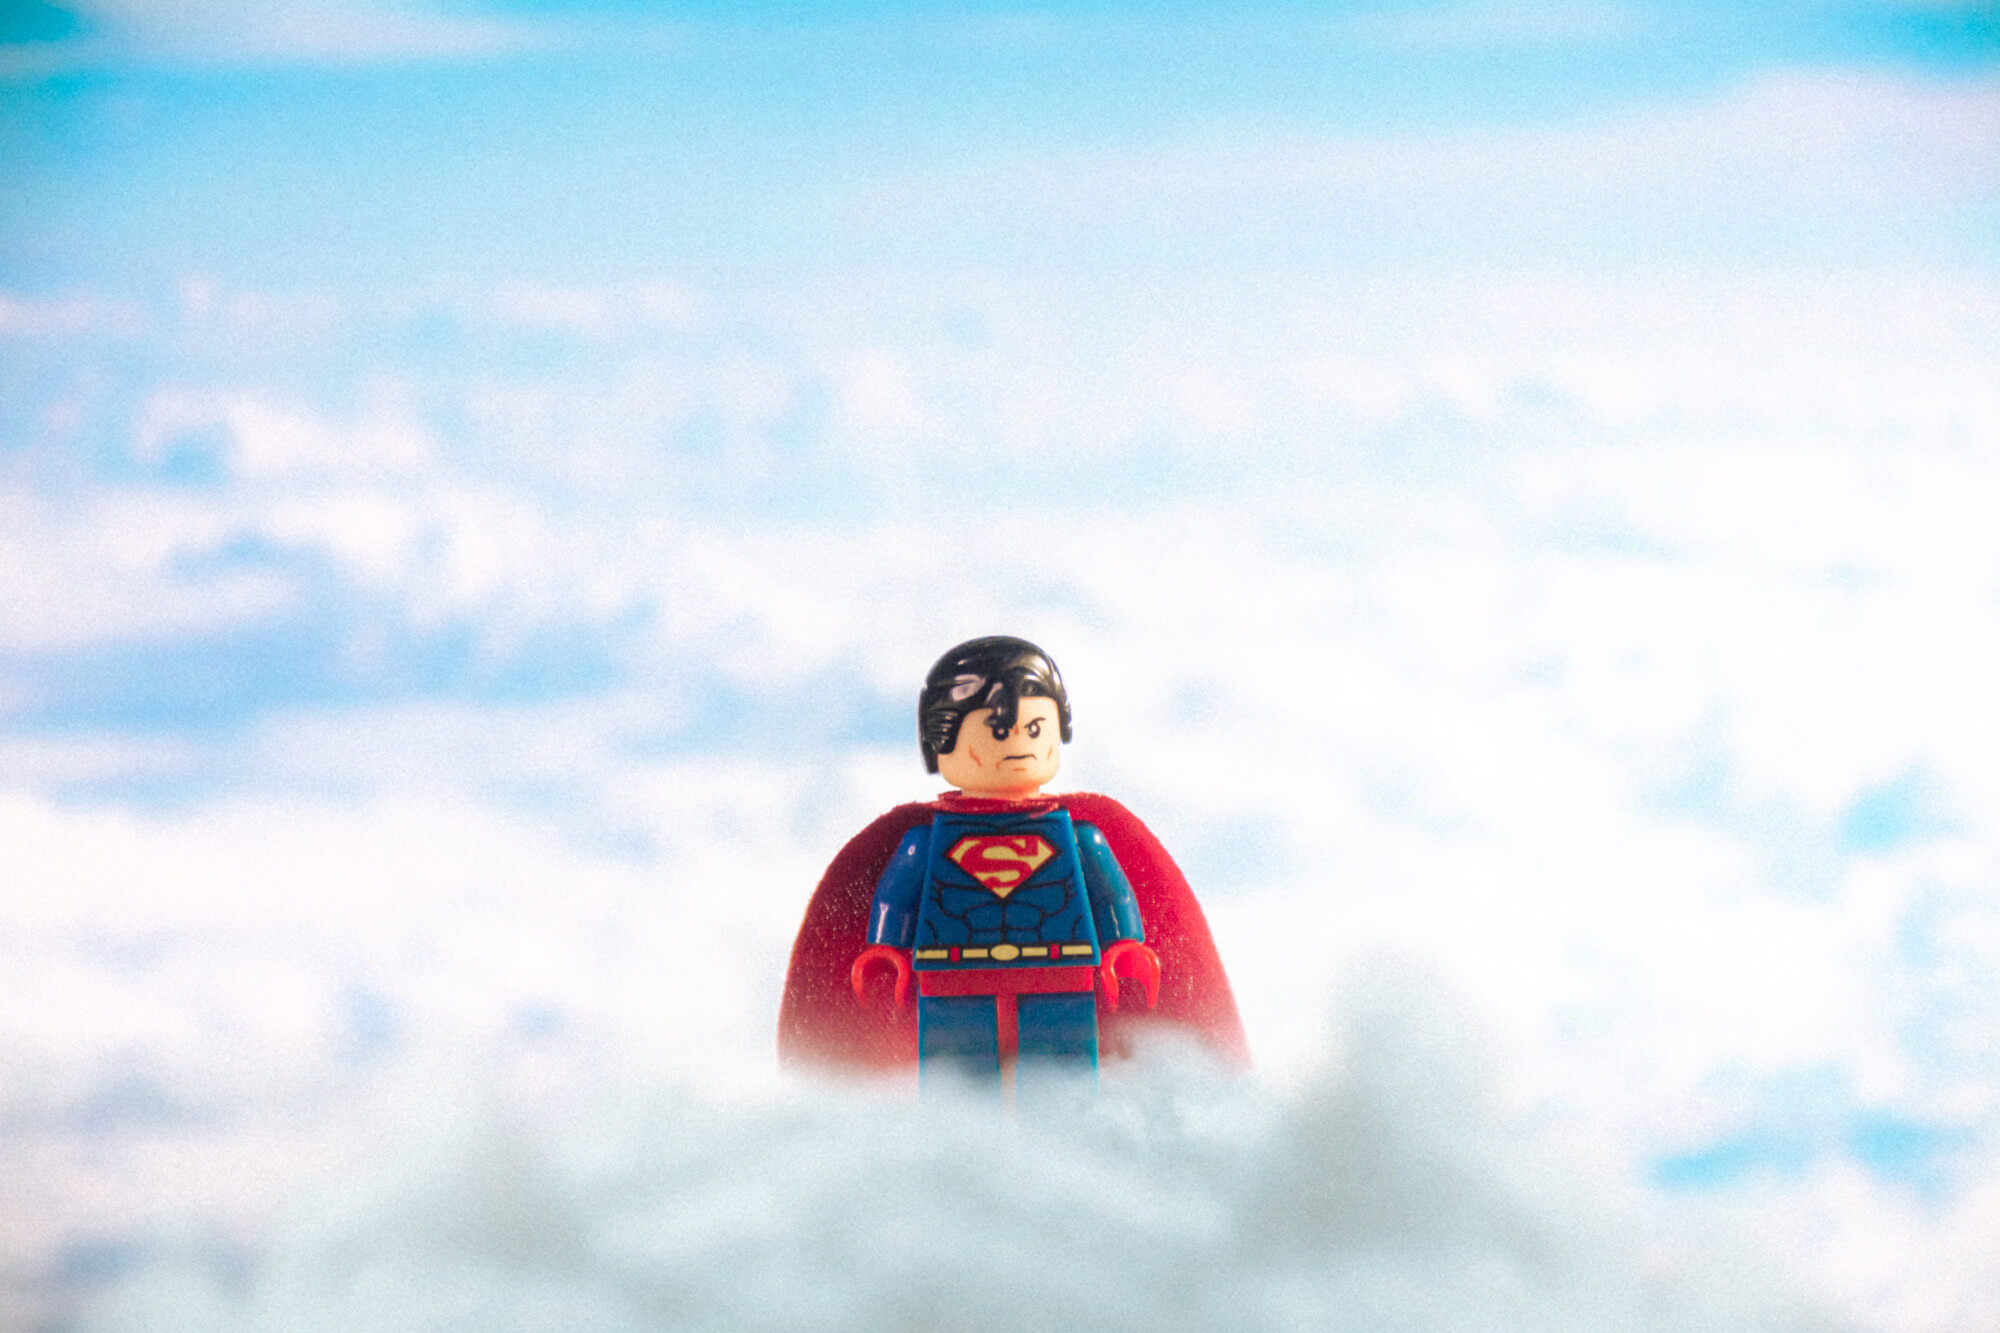 Superman just chillin' in the clouds.